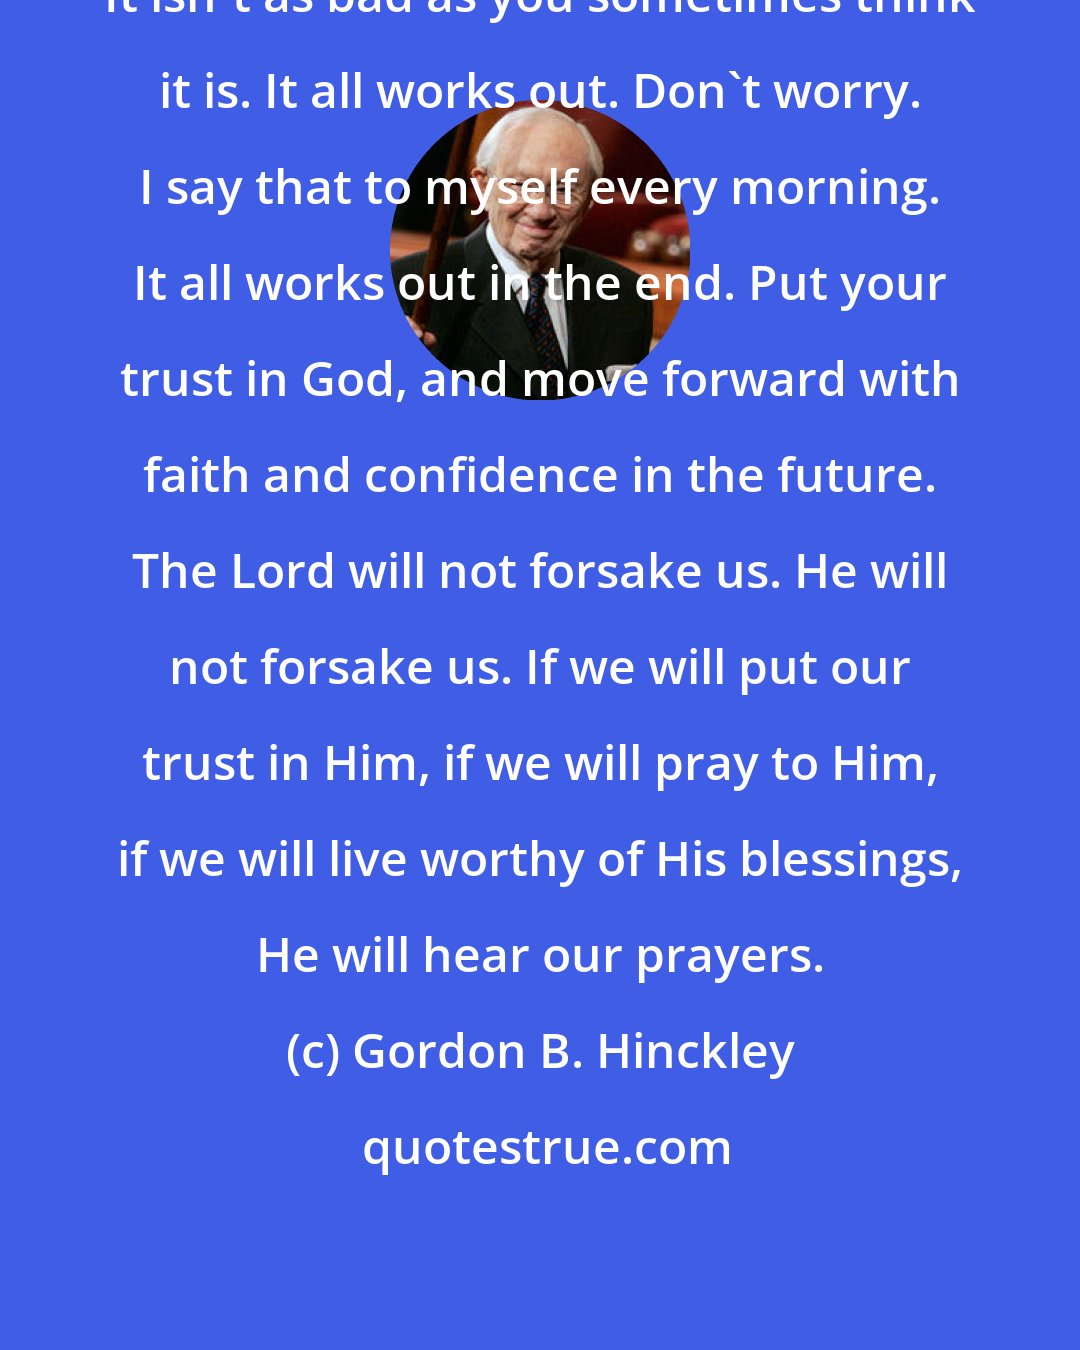 Gordon B. Hinckley: It isn't as bad as you sometimes think it is. It all works out. Don't worry. I say that to myself every morning. It all works out in the end. Put your trust in God, and move forward with faith and confidence in the future. The Lord will not forsake us. He will not forsake us. If we will put our trust in Him, if we will pray to Him, if we will live worthy of His blessings, He will hear our prayers.